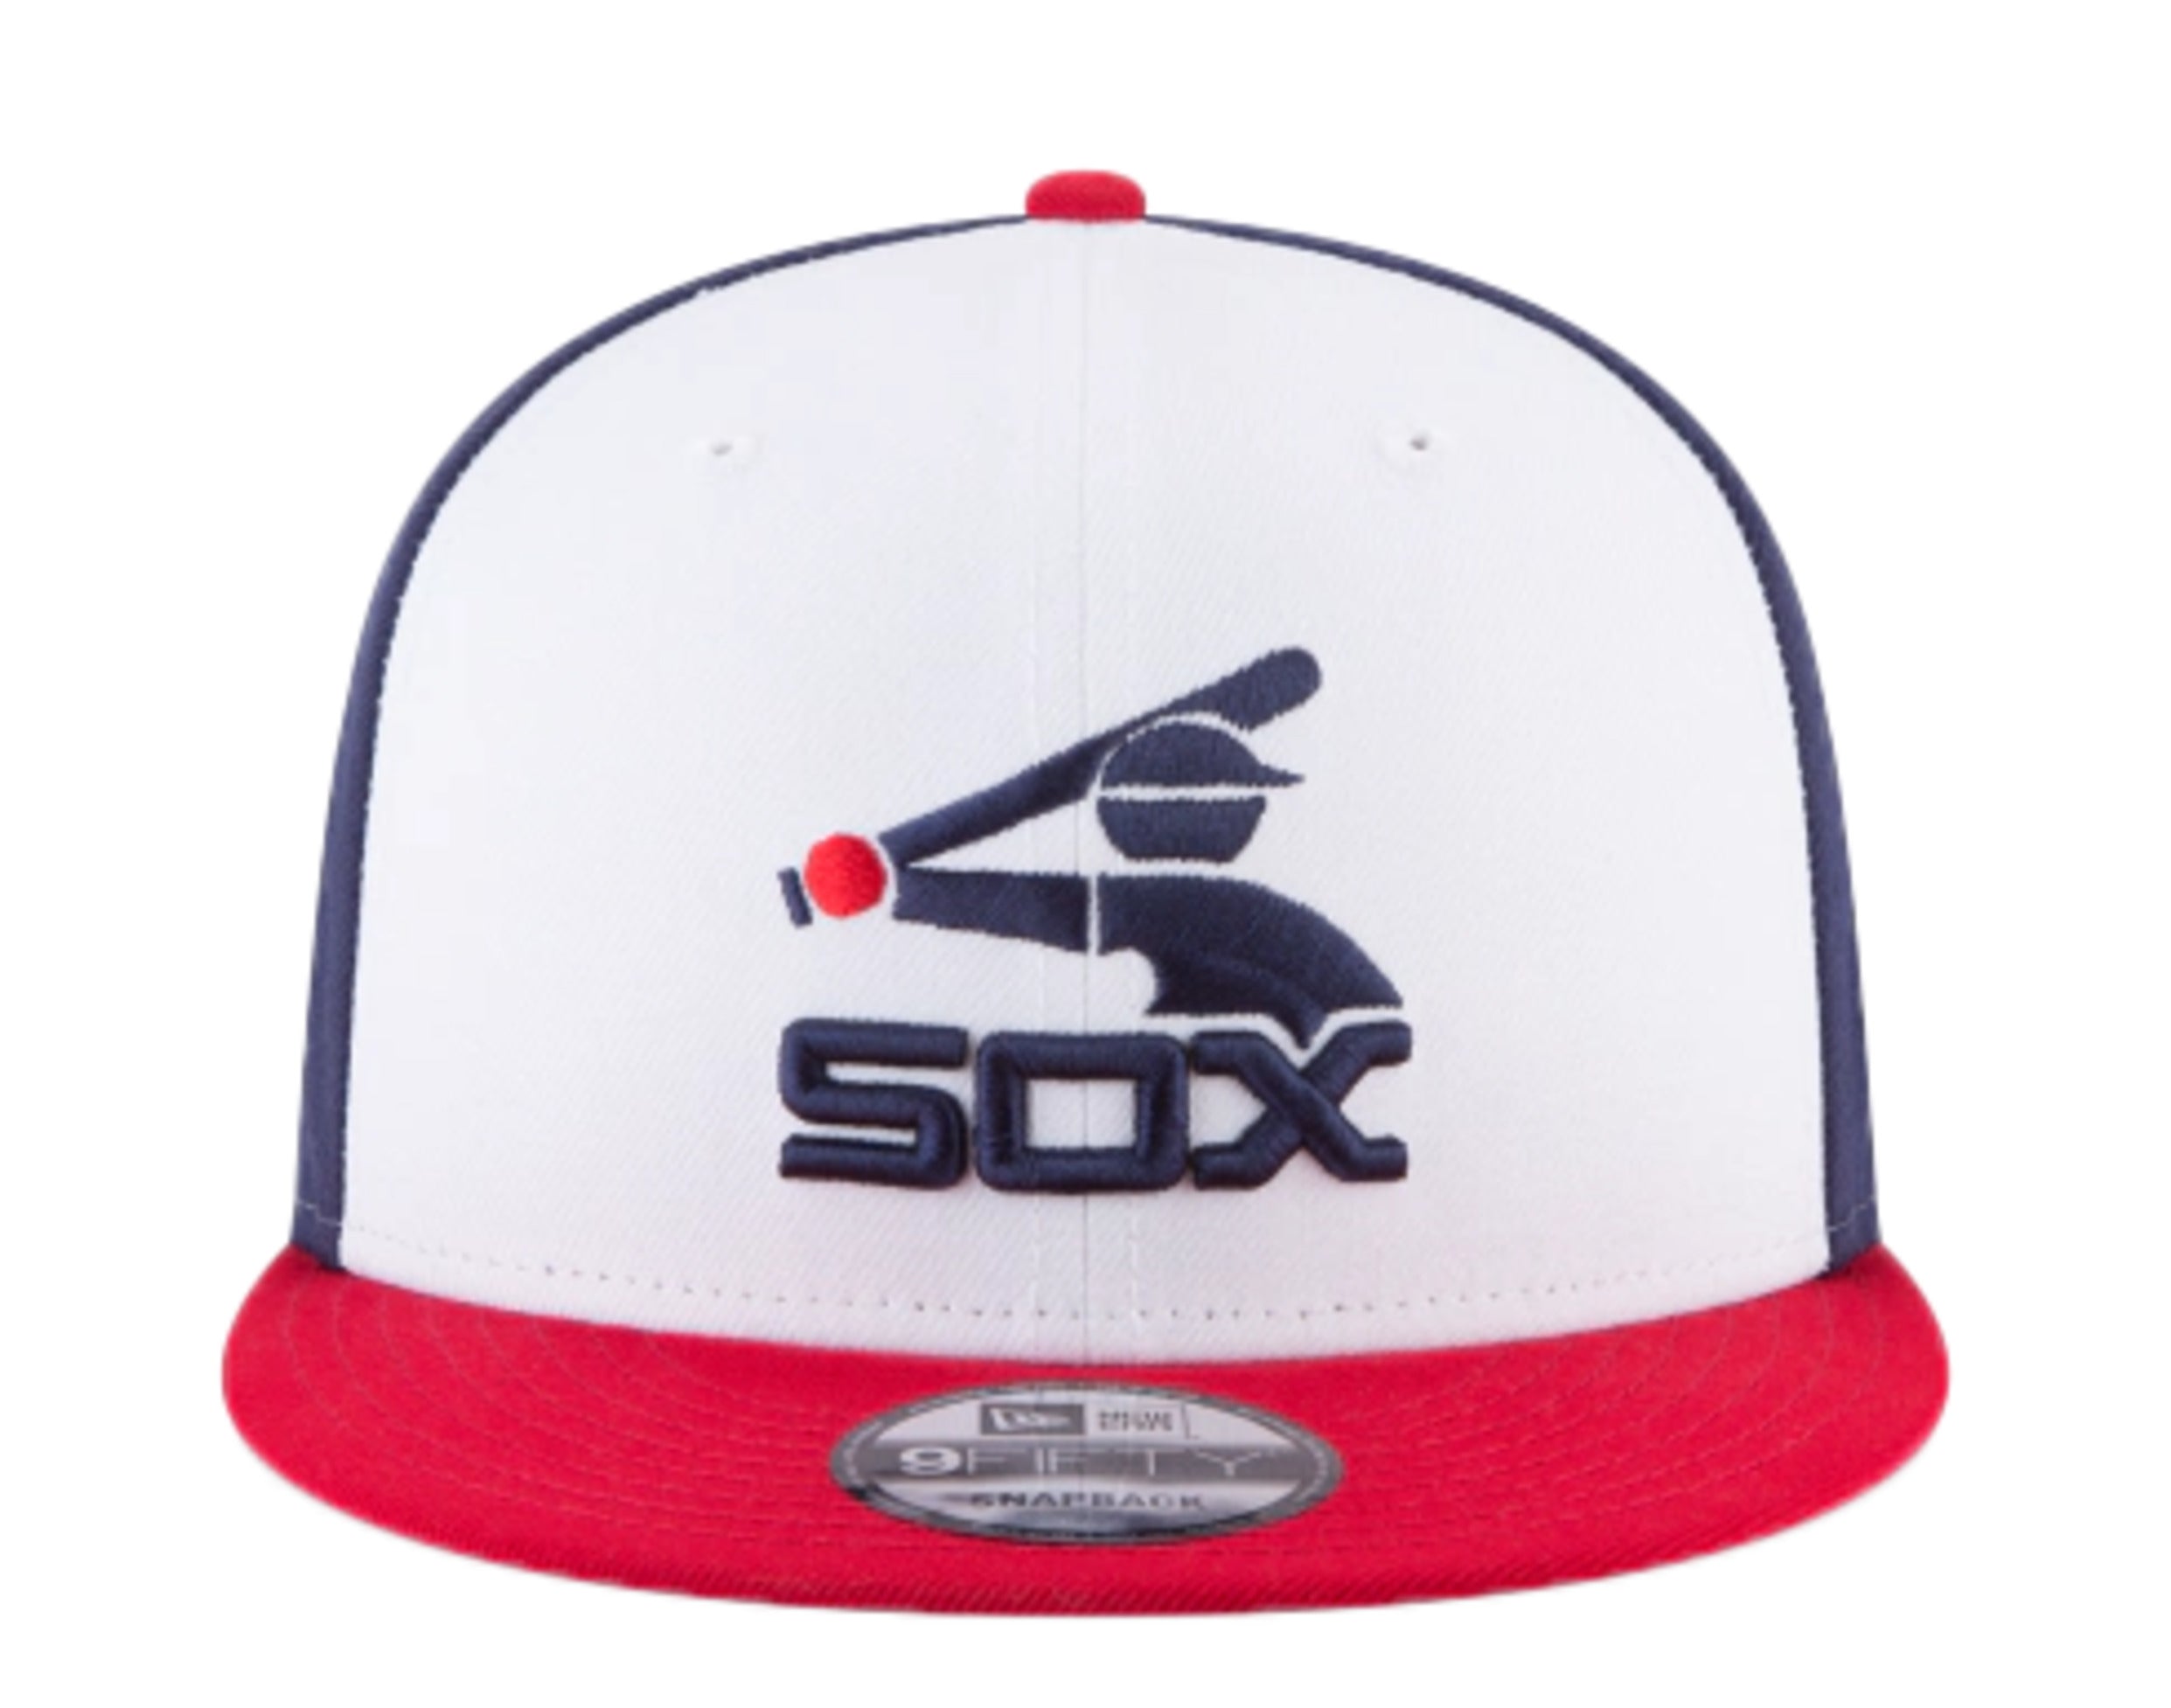 Chicago White Sox 1917 Cooperstown Collection caps and 140 styles by  American Needle - New Era